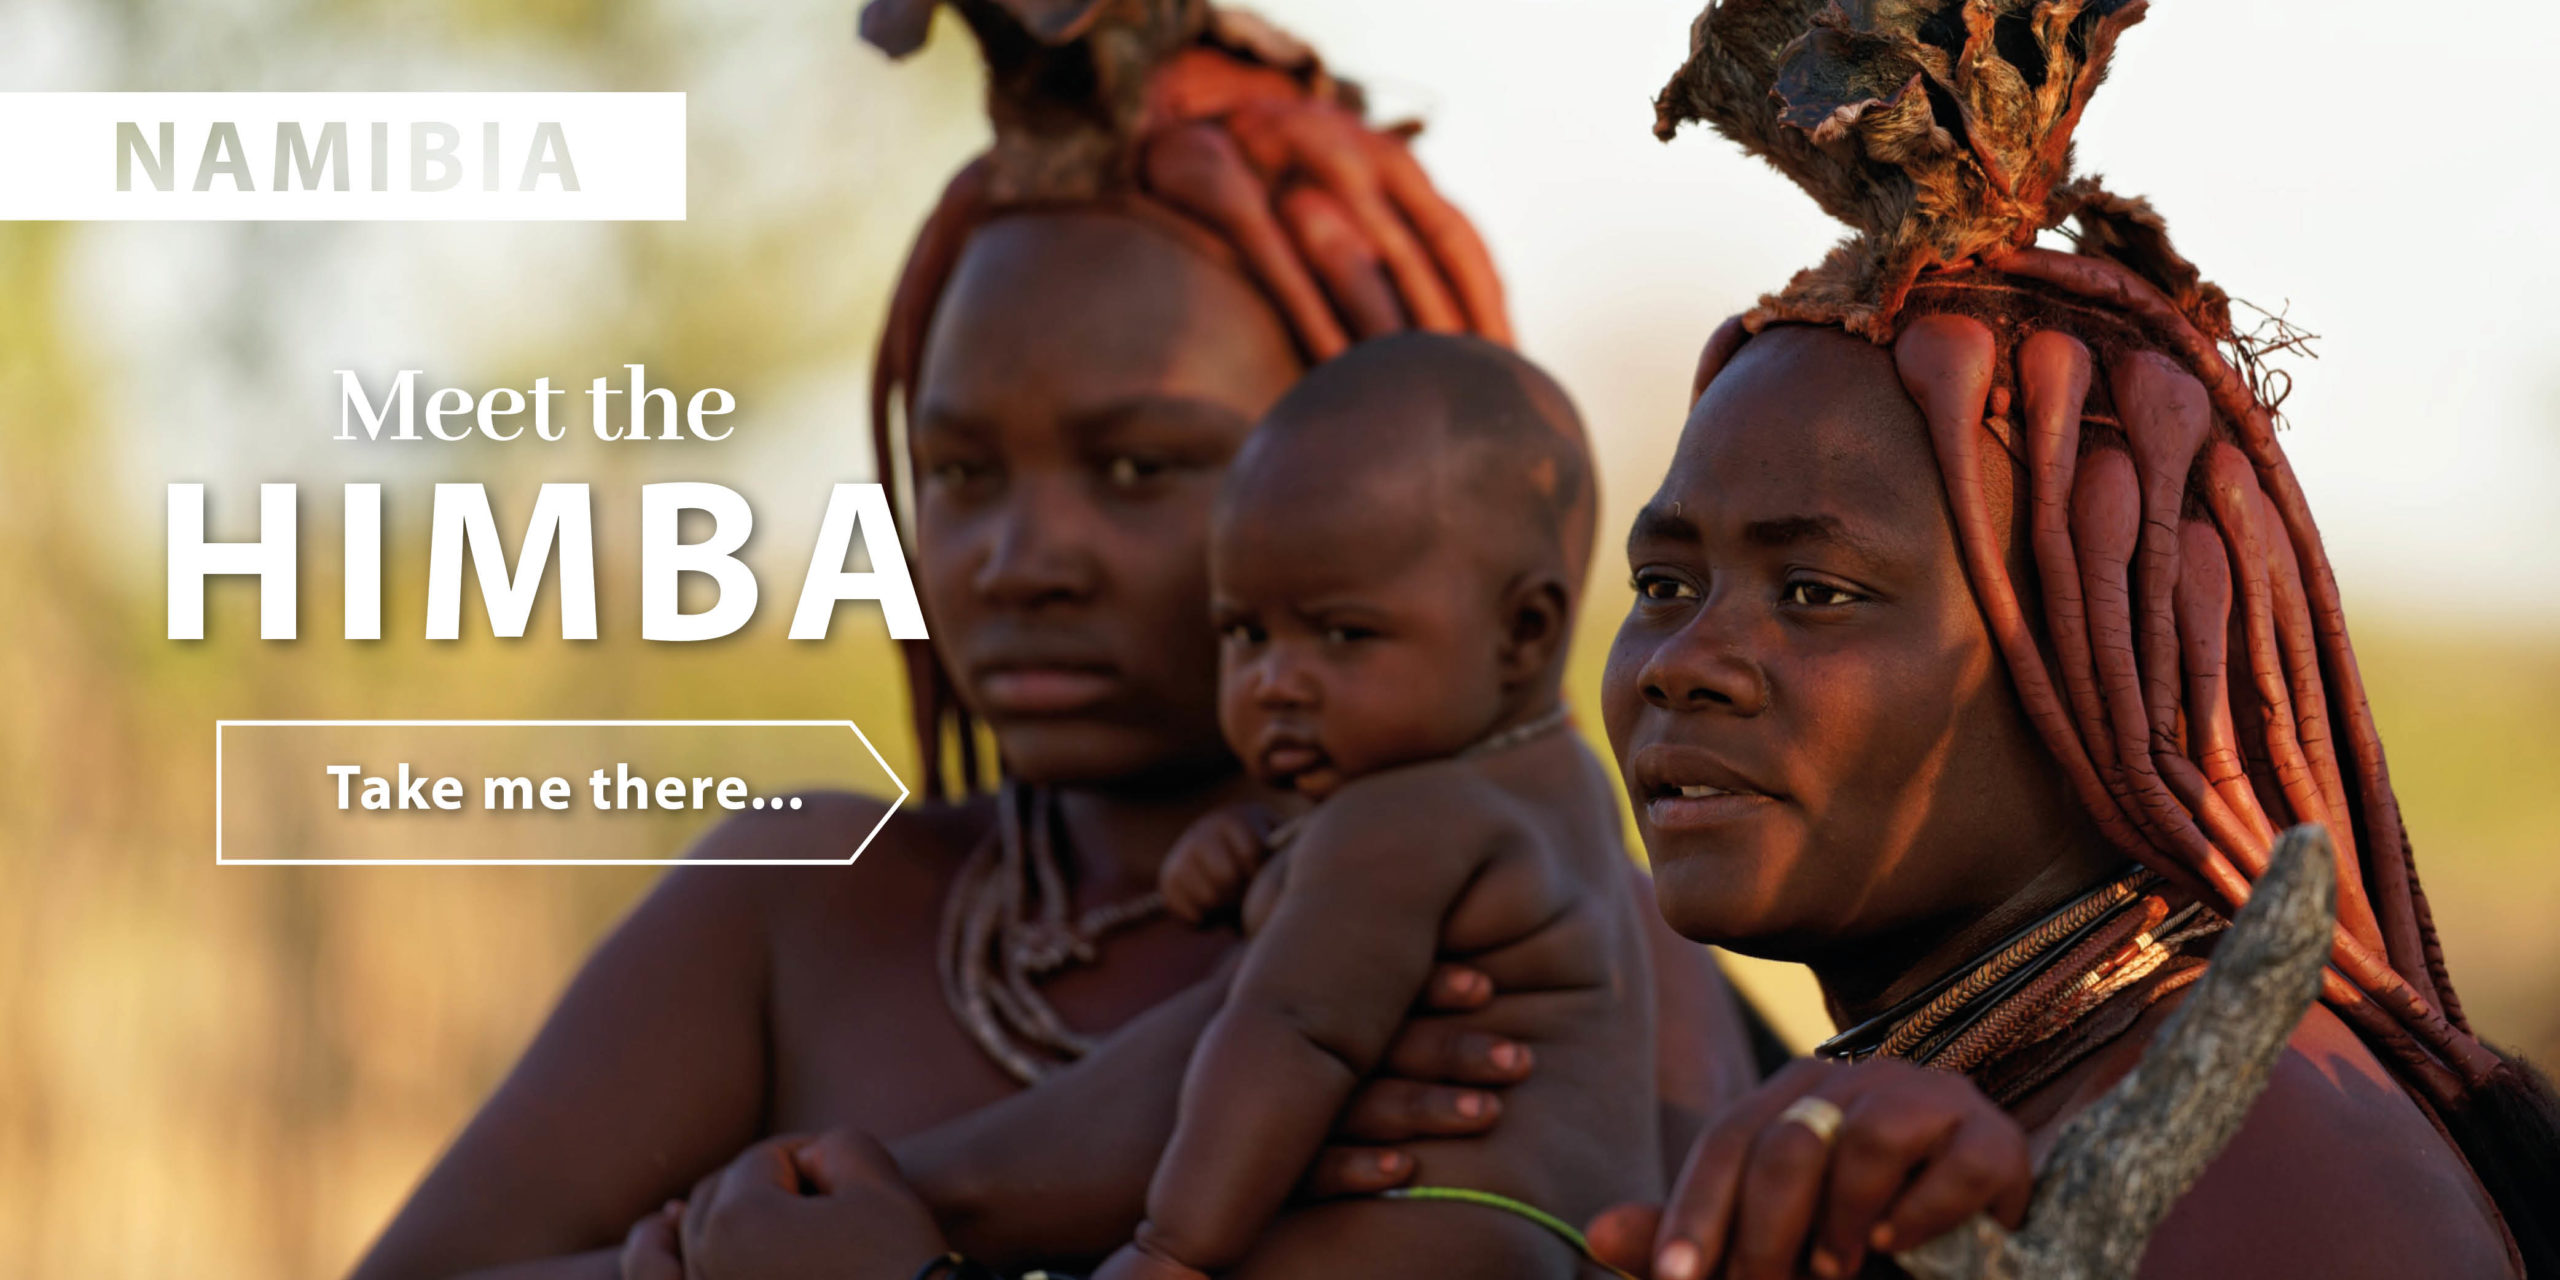 Authentic experience in Namibia meet the Himba people